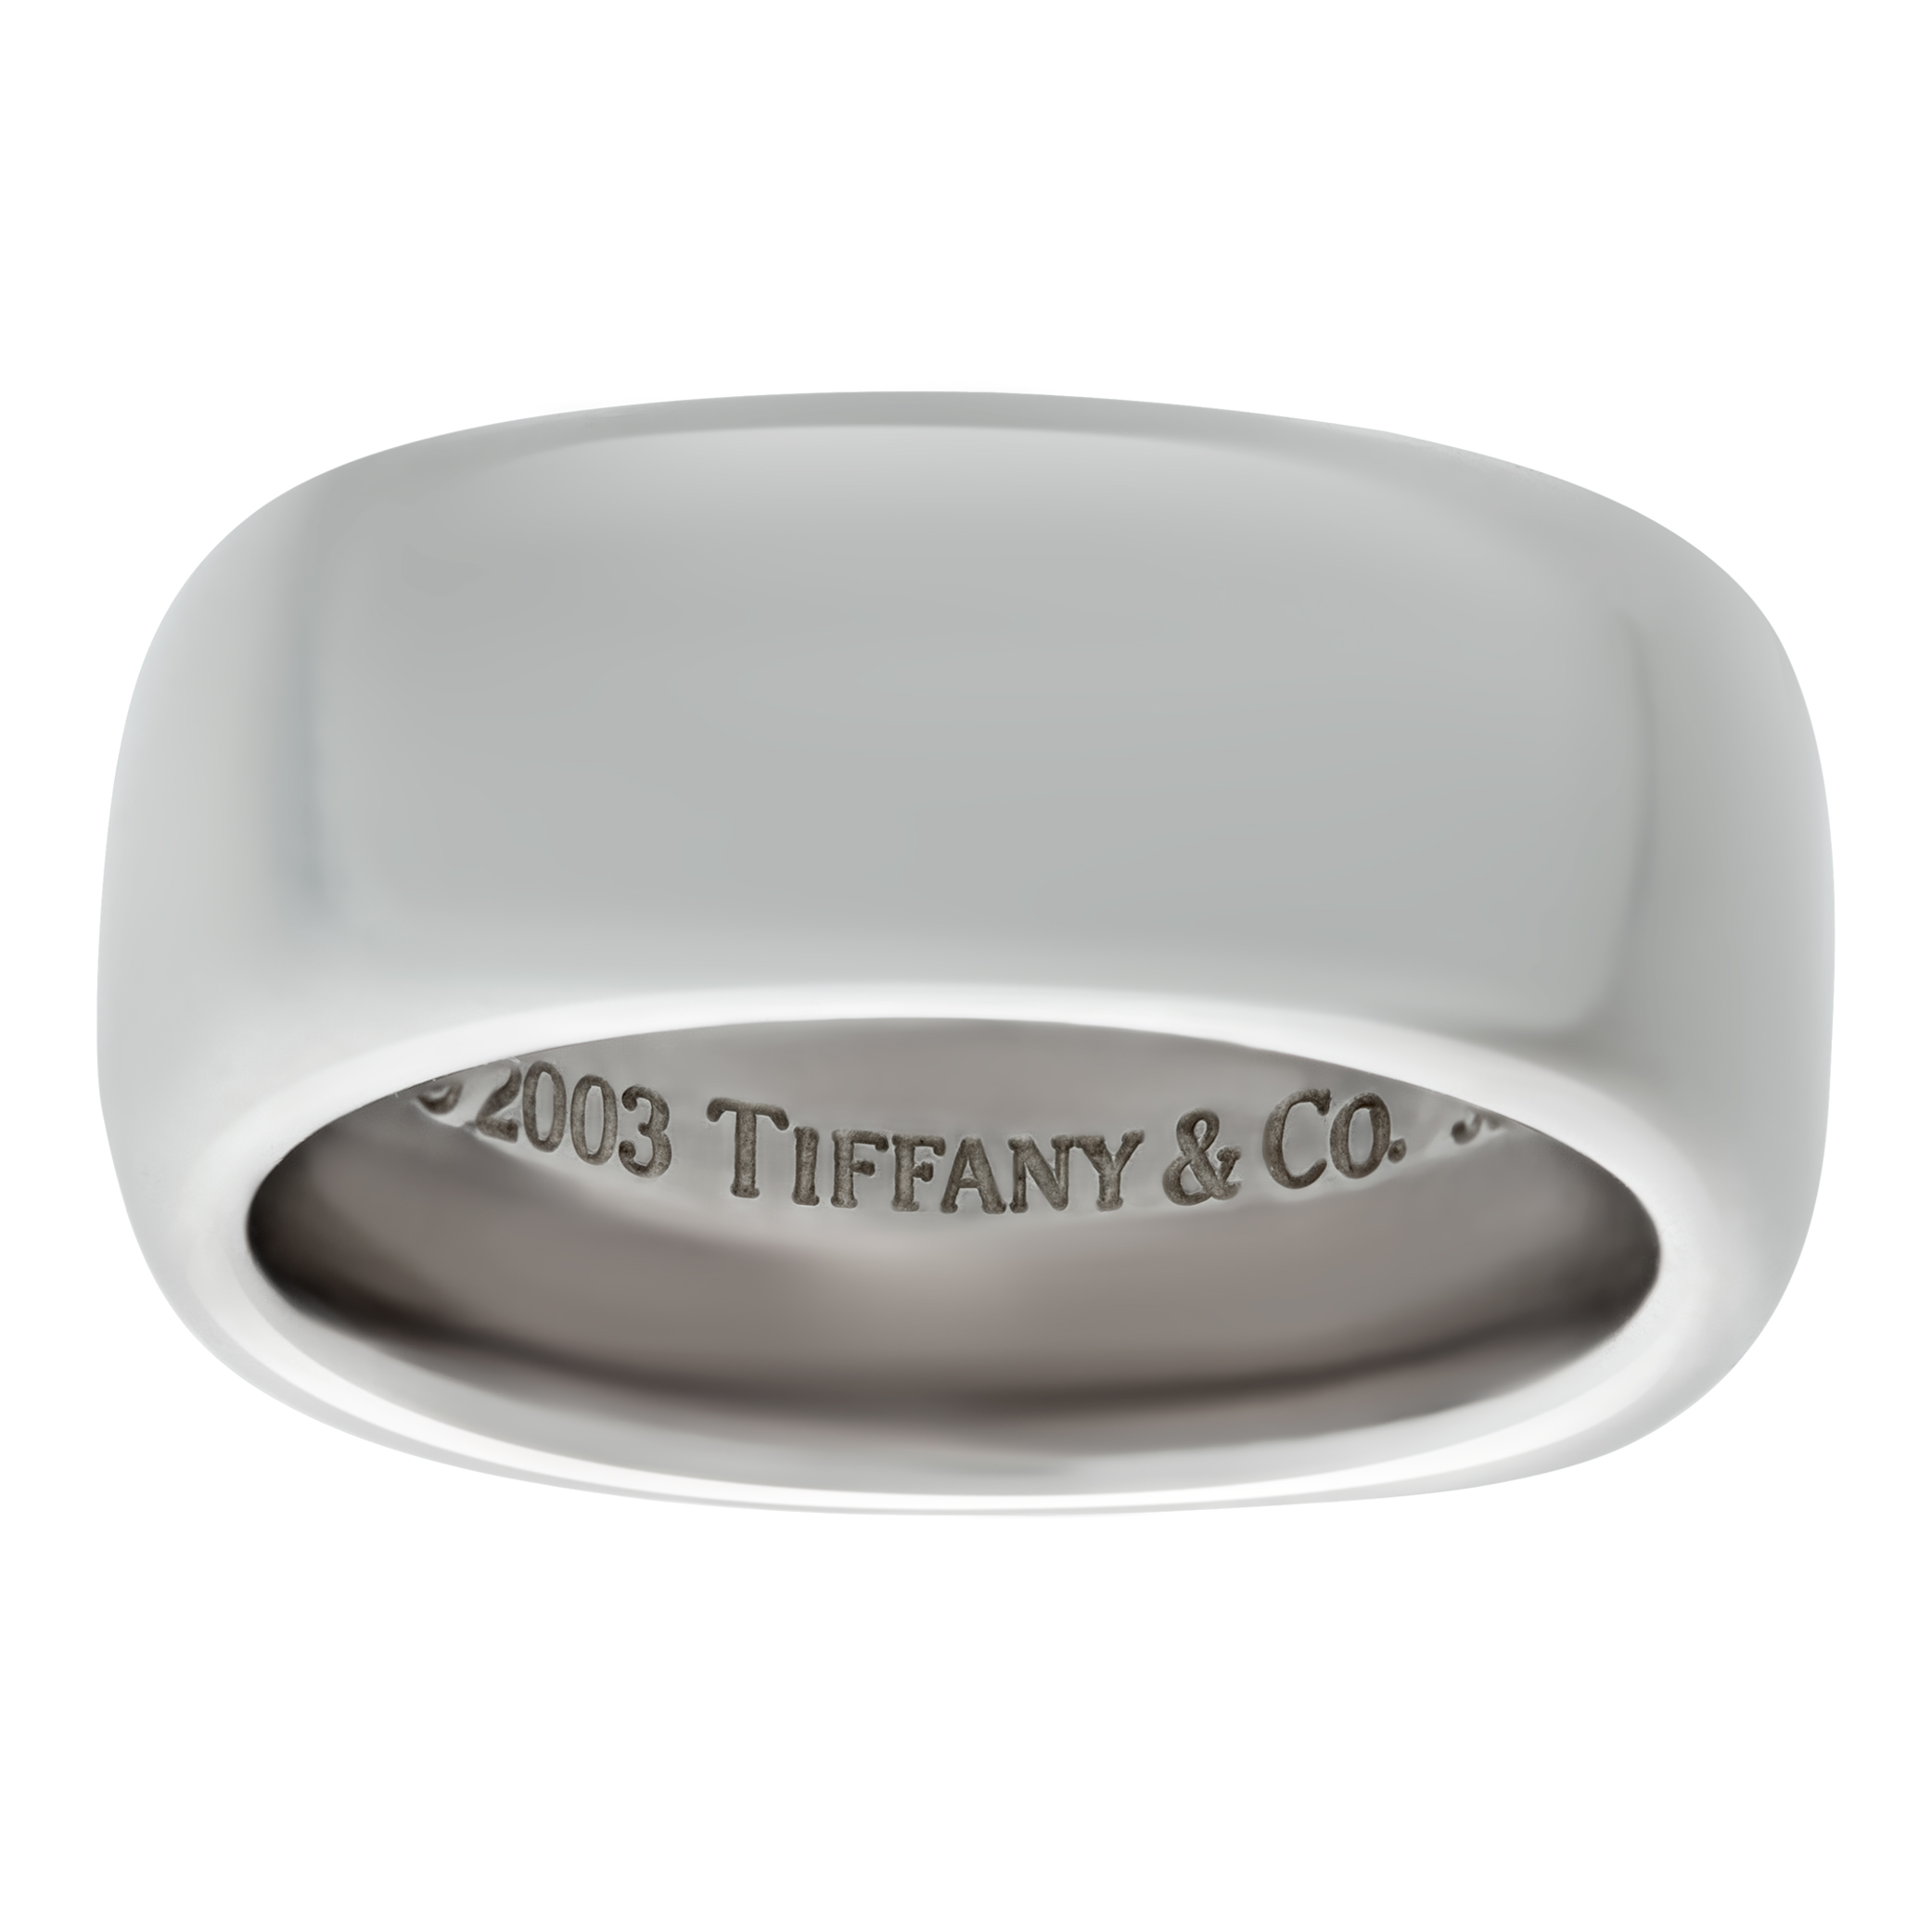 Tiffany & Co. 2003 wide square smooth band ring in sterling silver